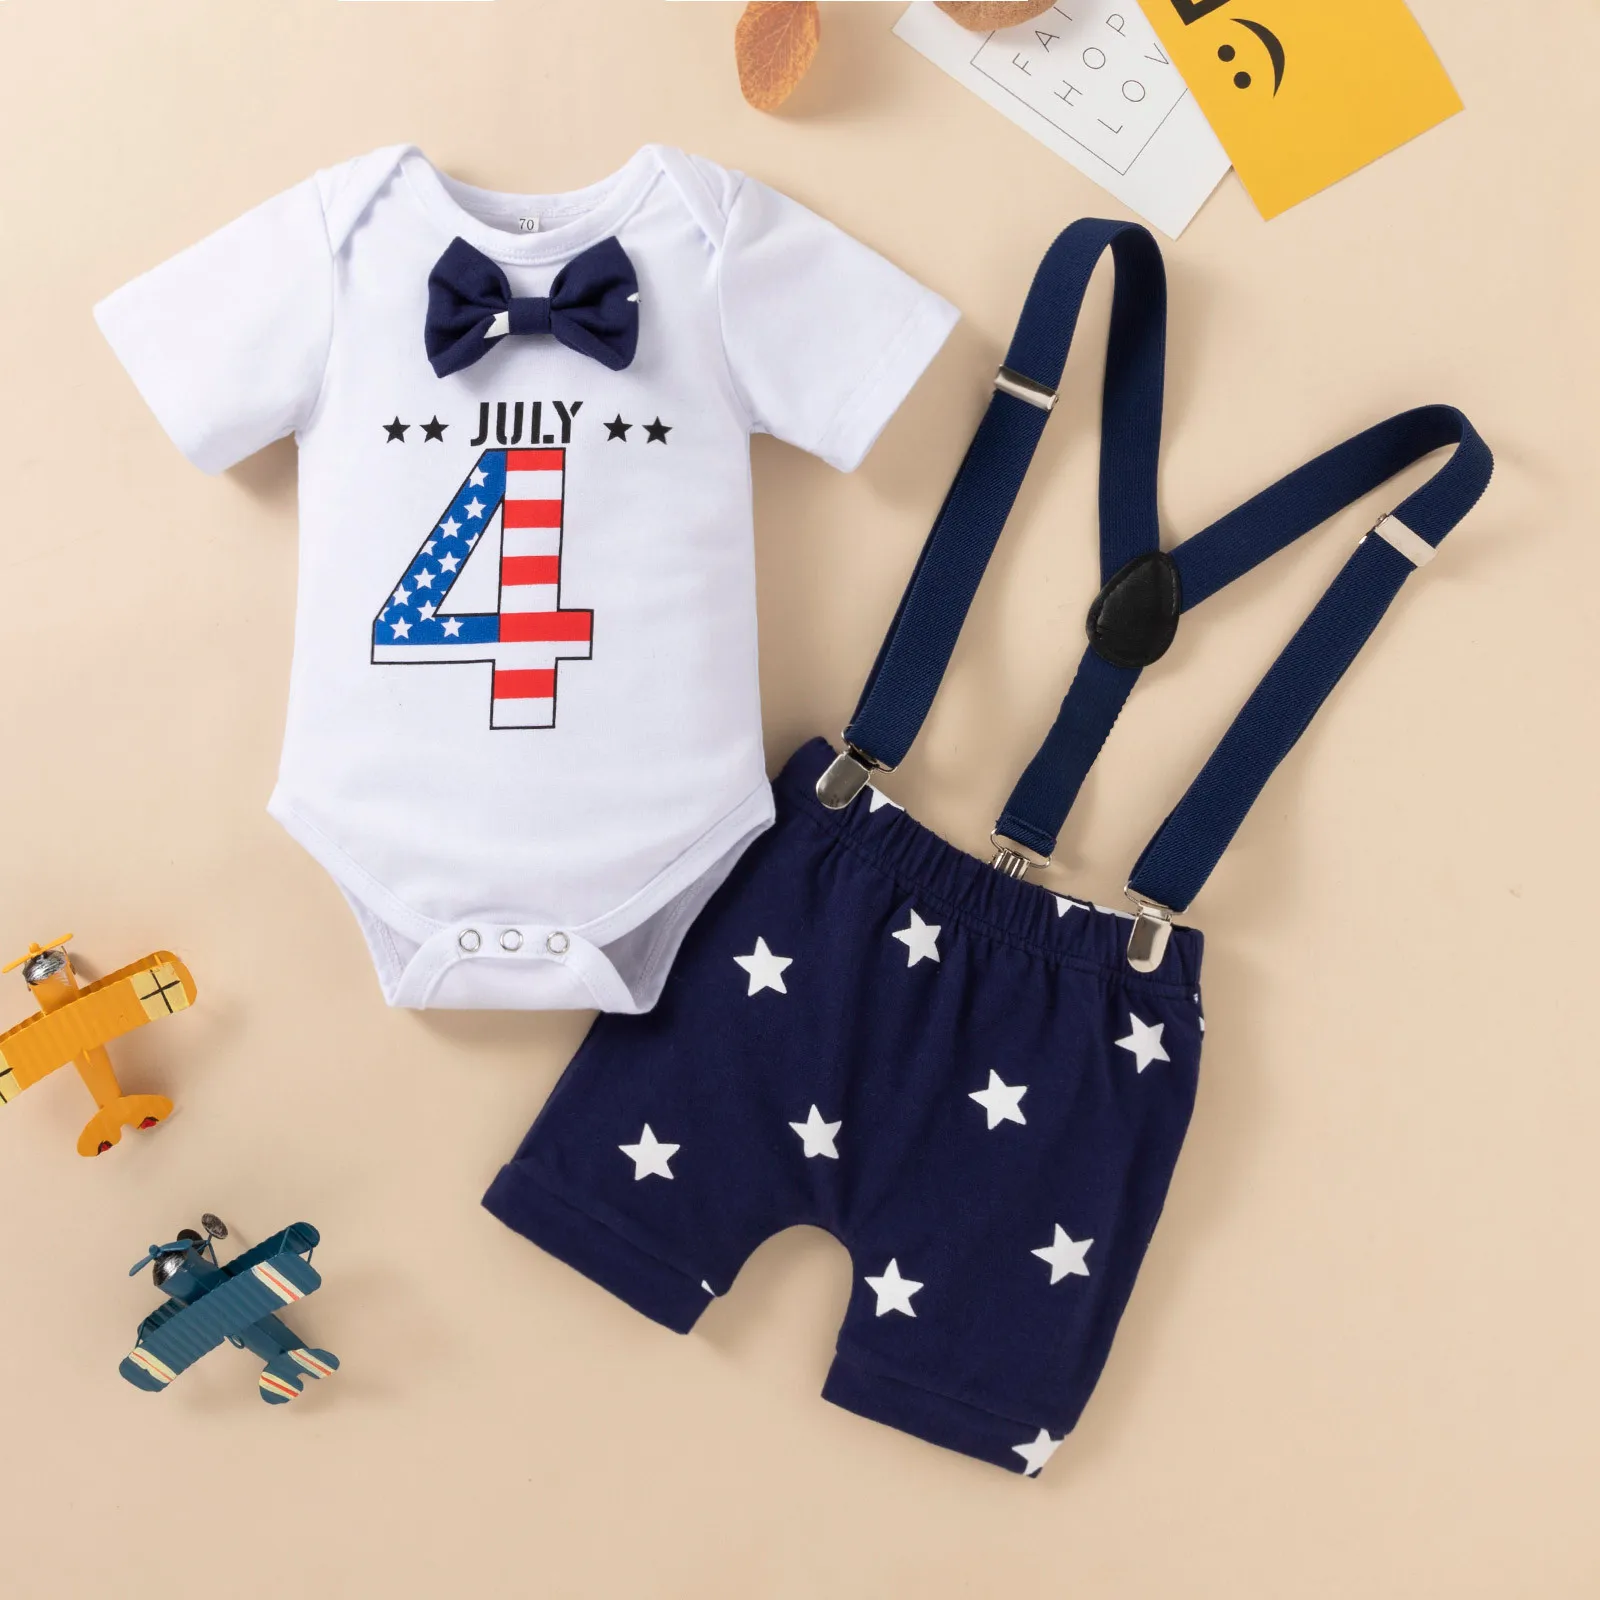 

Infant Baby Boys Outfit Set 4th Julys Independence Day Baby Clothing Bowtie Romper Stars Print Suspender Shorts Baby Boy Clothes